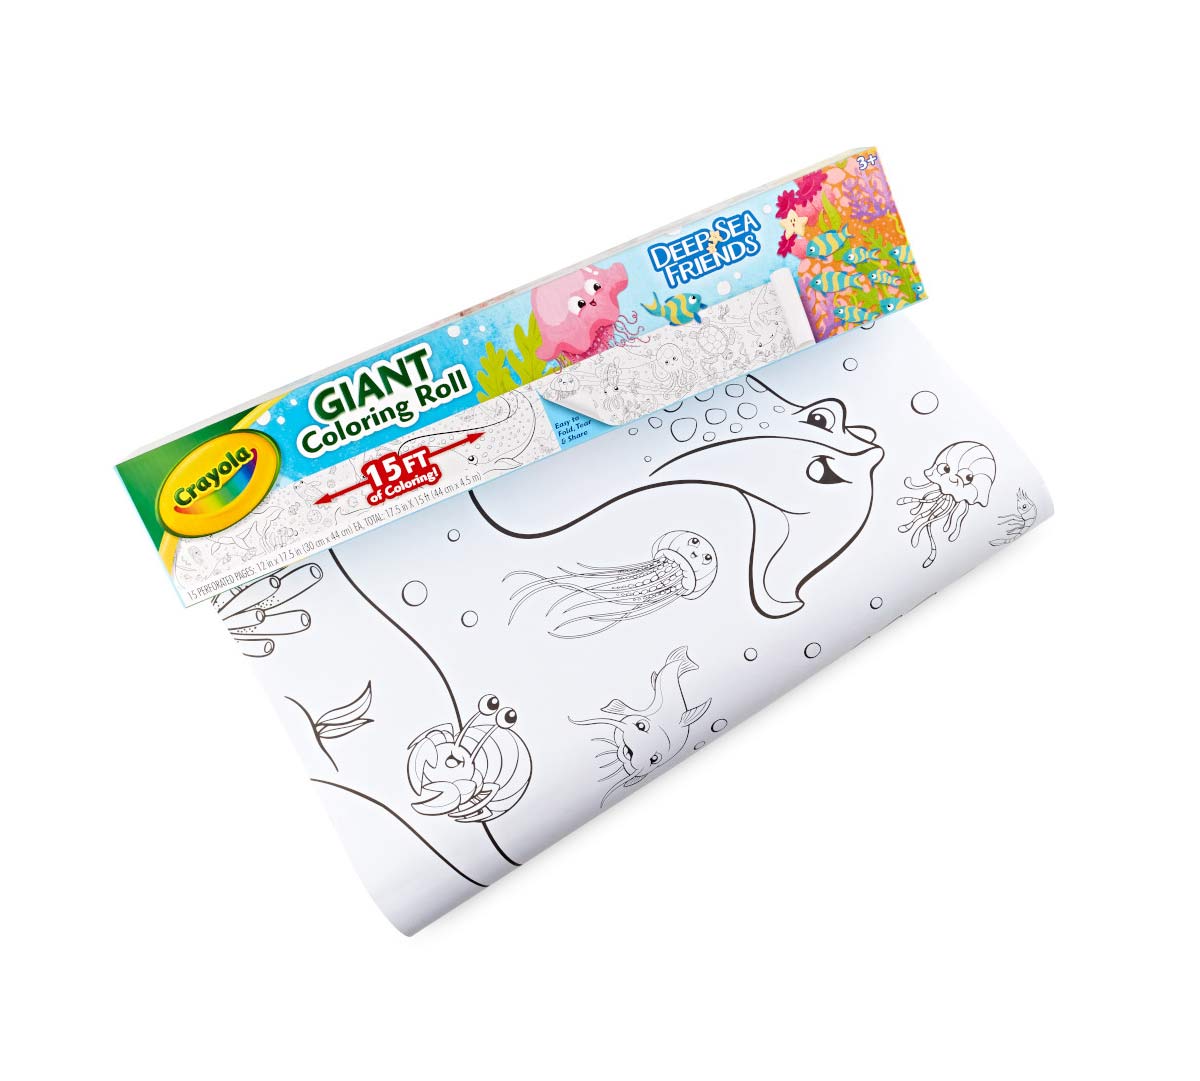 Rolly Art Coloring Paper, Rolly Art Coloring Roll, Childrens Drawing Roll  Paper, Rolly Art Oversized Coloring Roll, DIY Painting Drawing Color  Filling